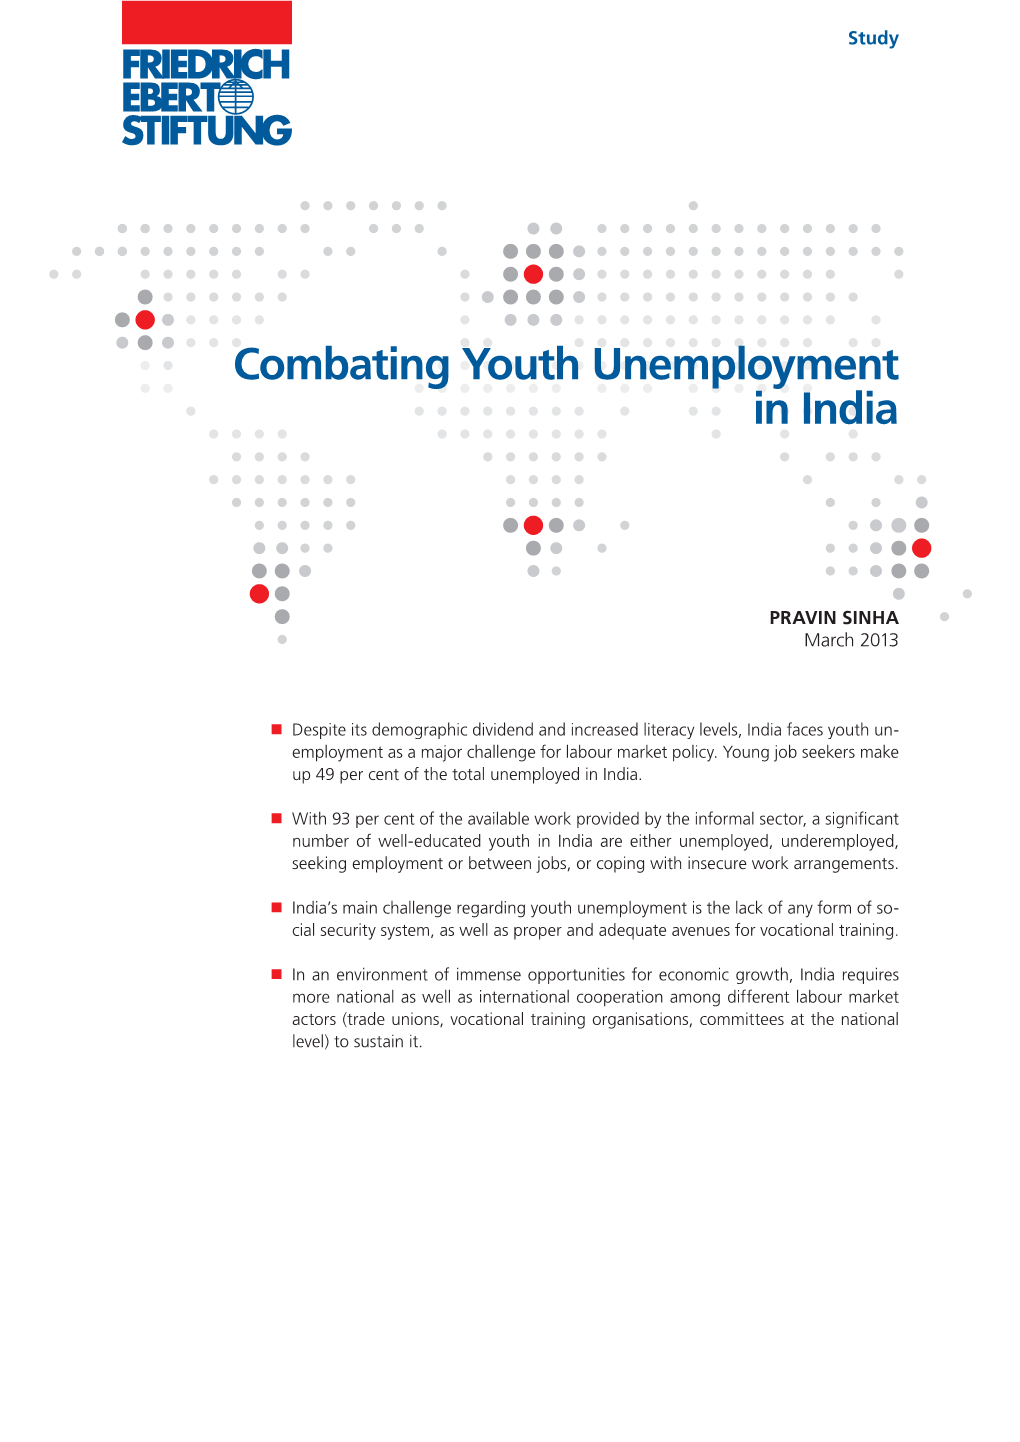 Combating Youth Unemployment in India